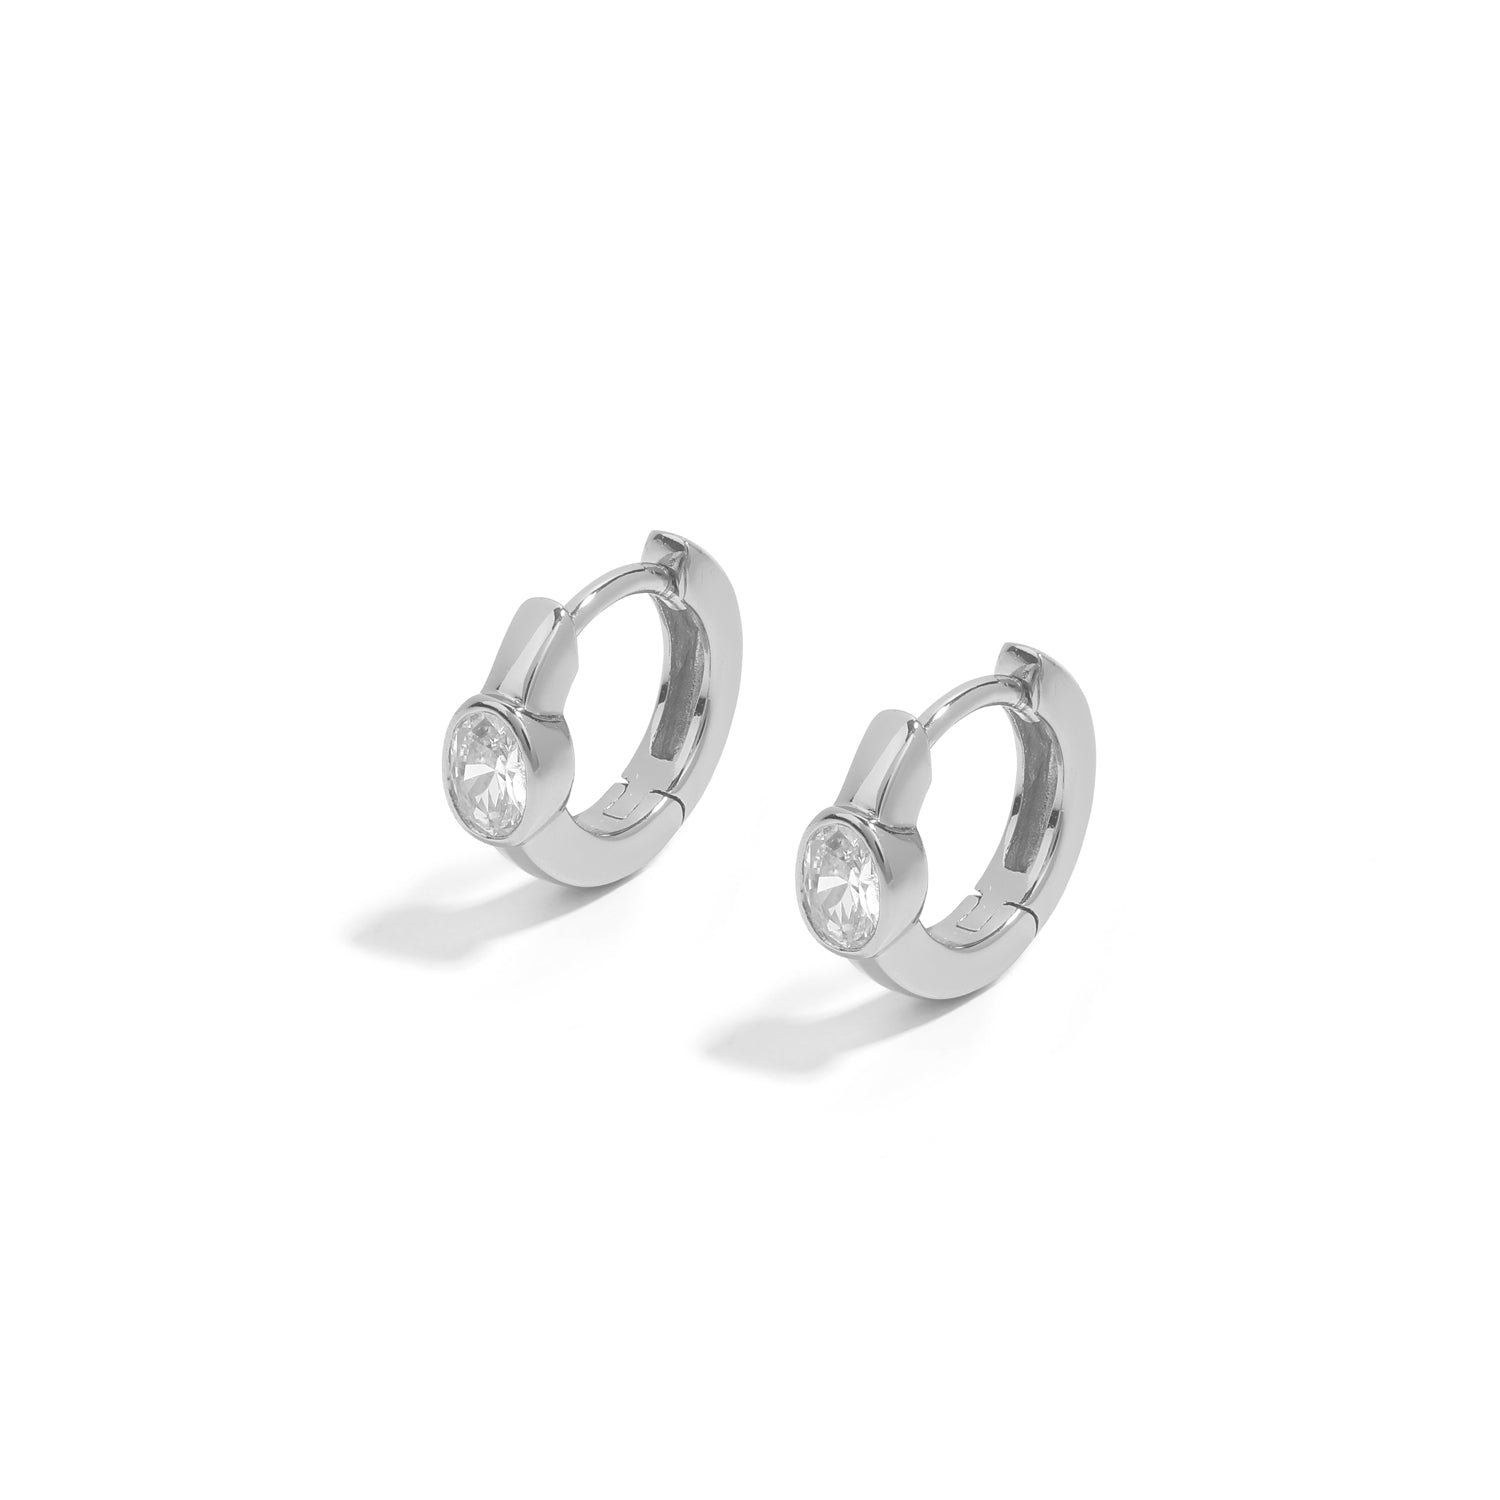 Minimalist and dainty earrings. 925 silver huggies set with cubic zirconia stones.